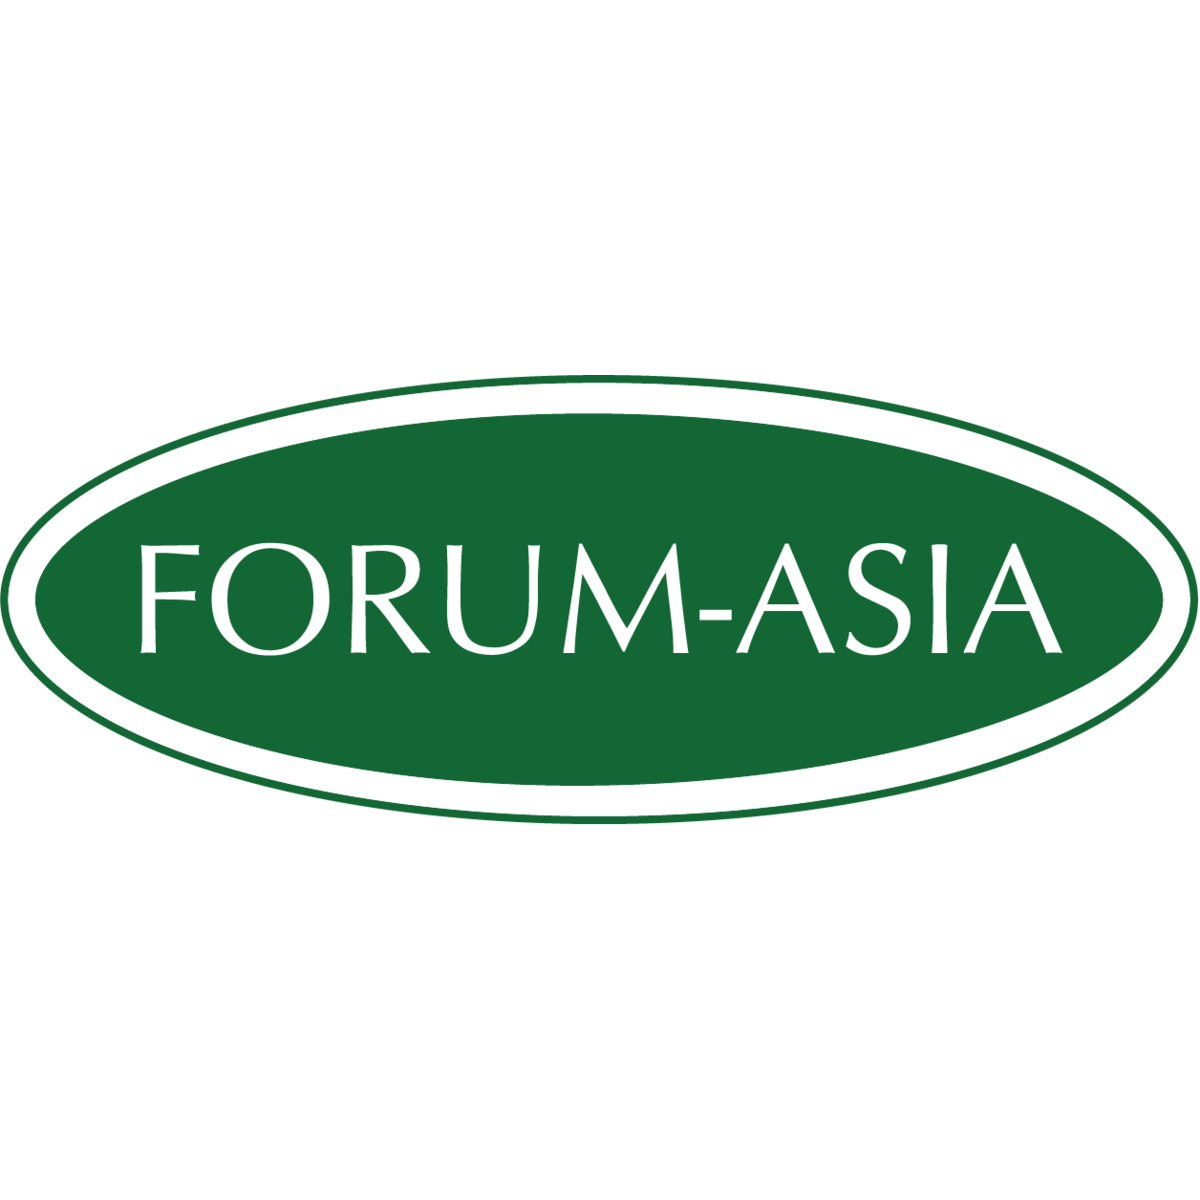 Asian Forum for Human Rights and Development (FORUM-ASIA)